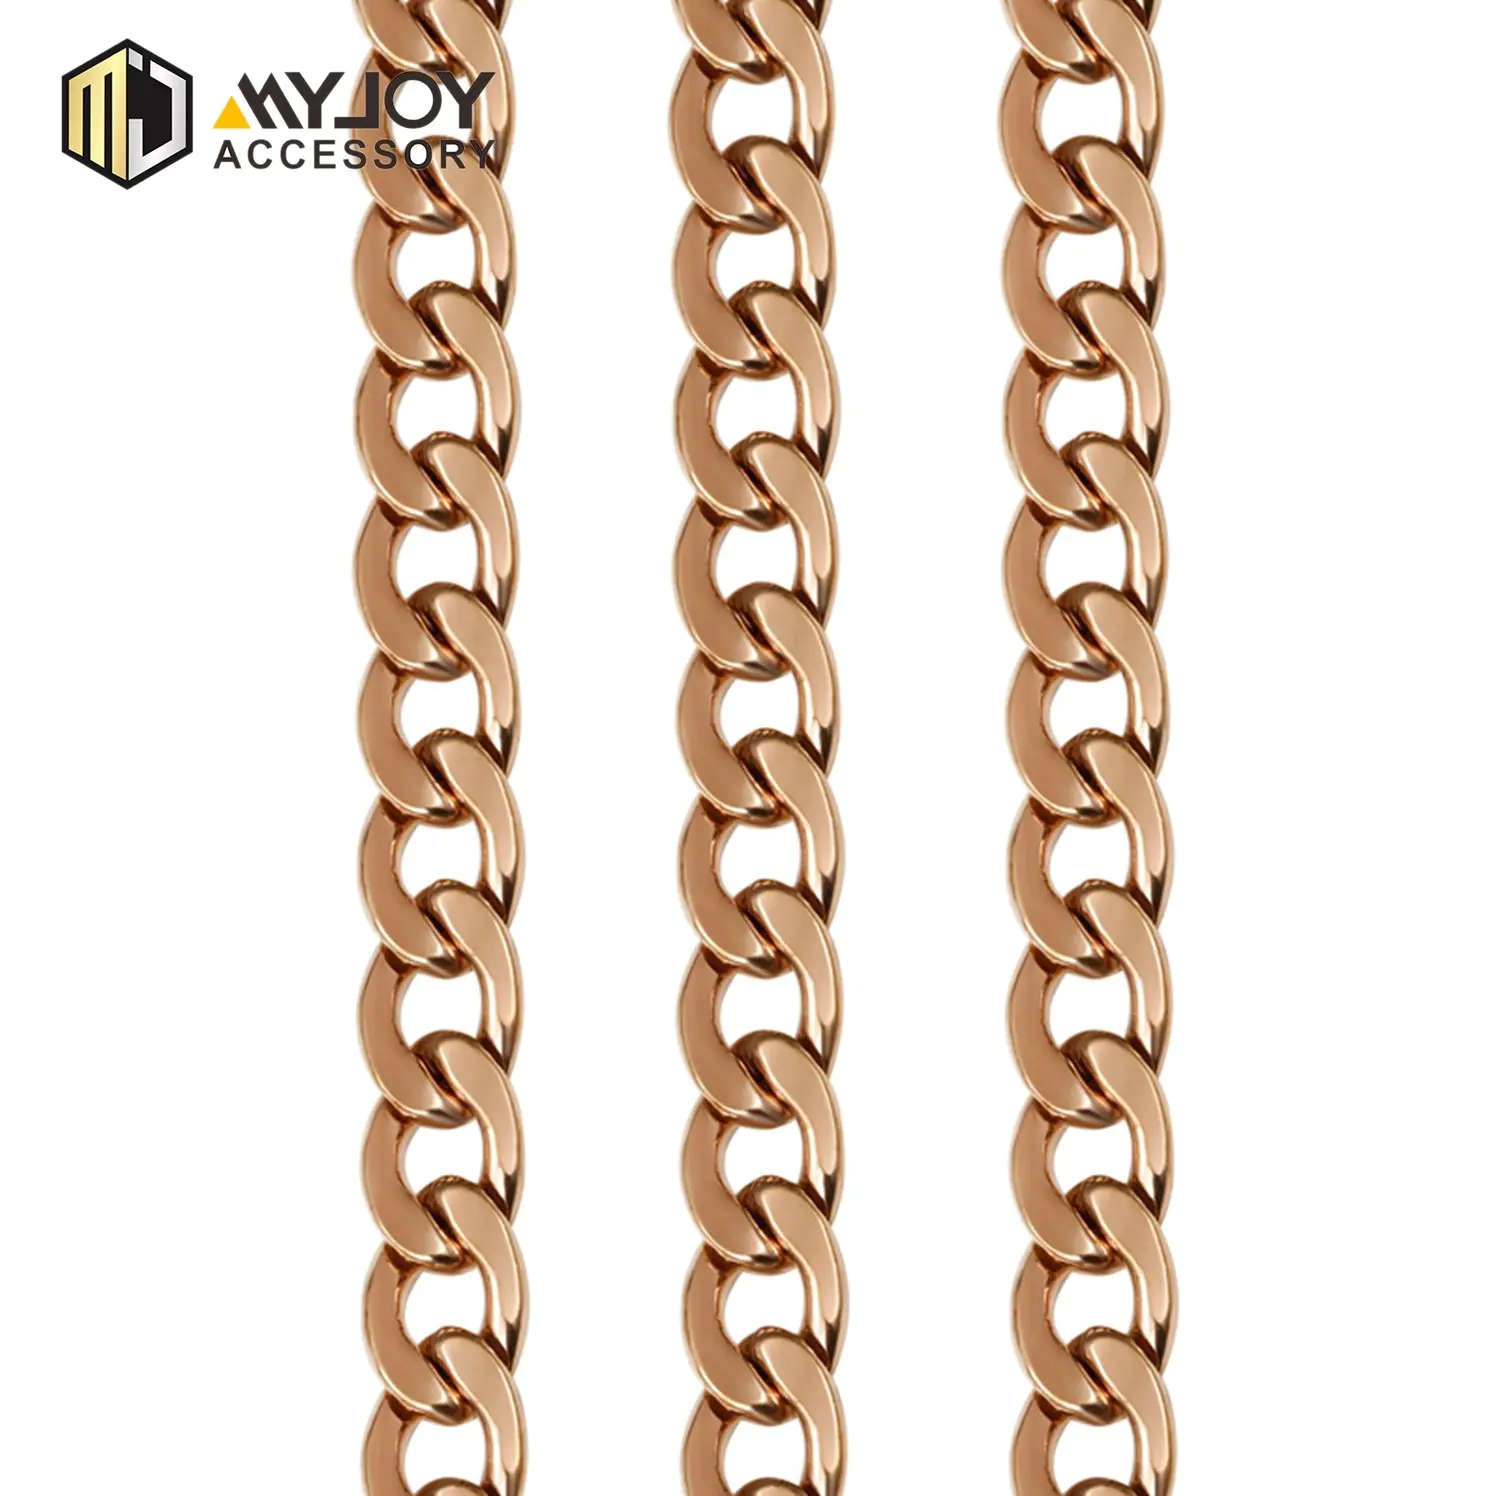 MYJOY 13mm1050mm strap chain company for purses